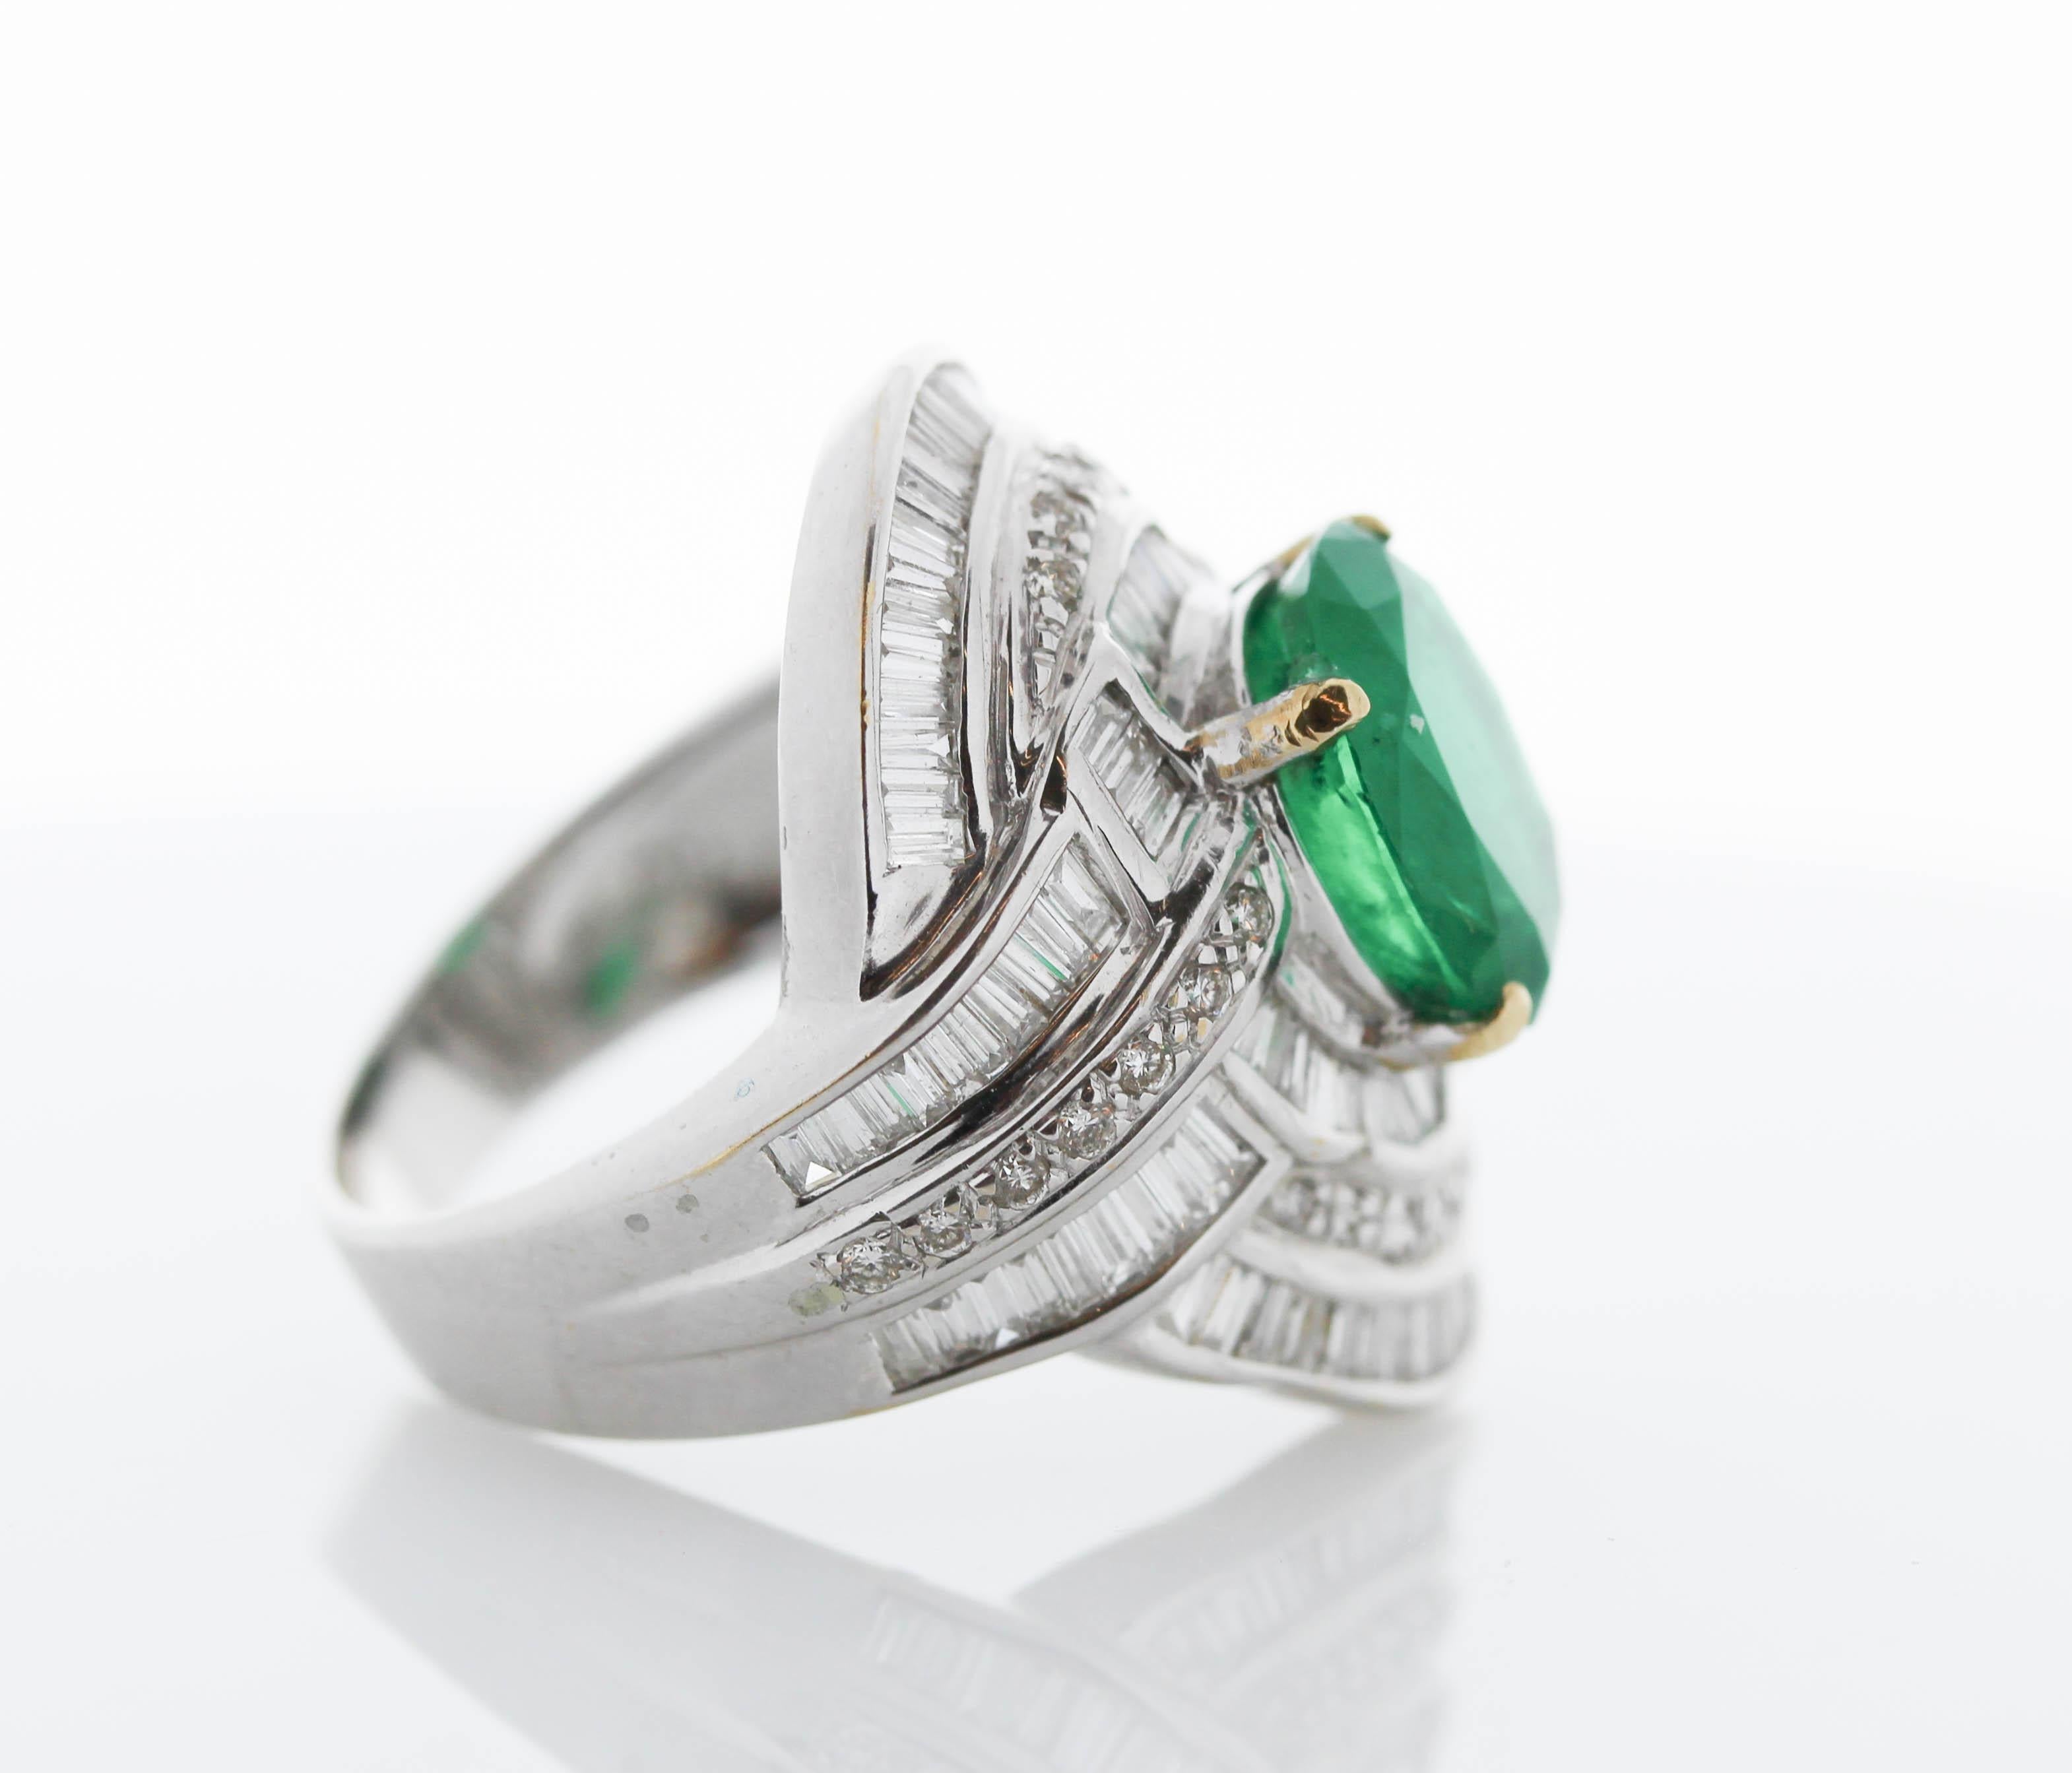 Remarkable in craftsmanship and design, this gorgeous 18k white gold emerald and diamond ring is undeniably unique. An oval cut fine quality emerald sits in the center secured in a prong setting with a weight of 3.89 carats and measures 11.1 X9.3MM.